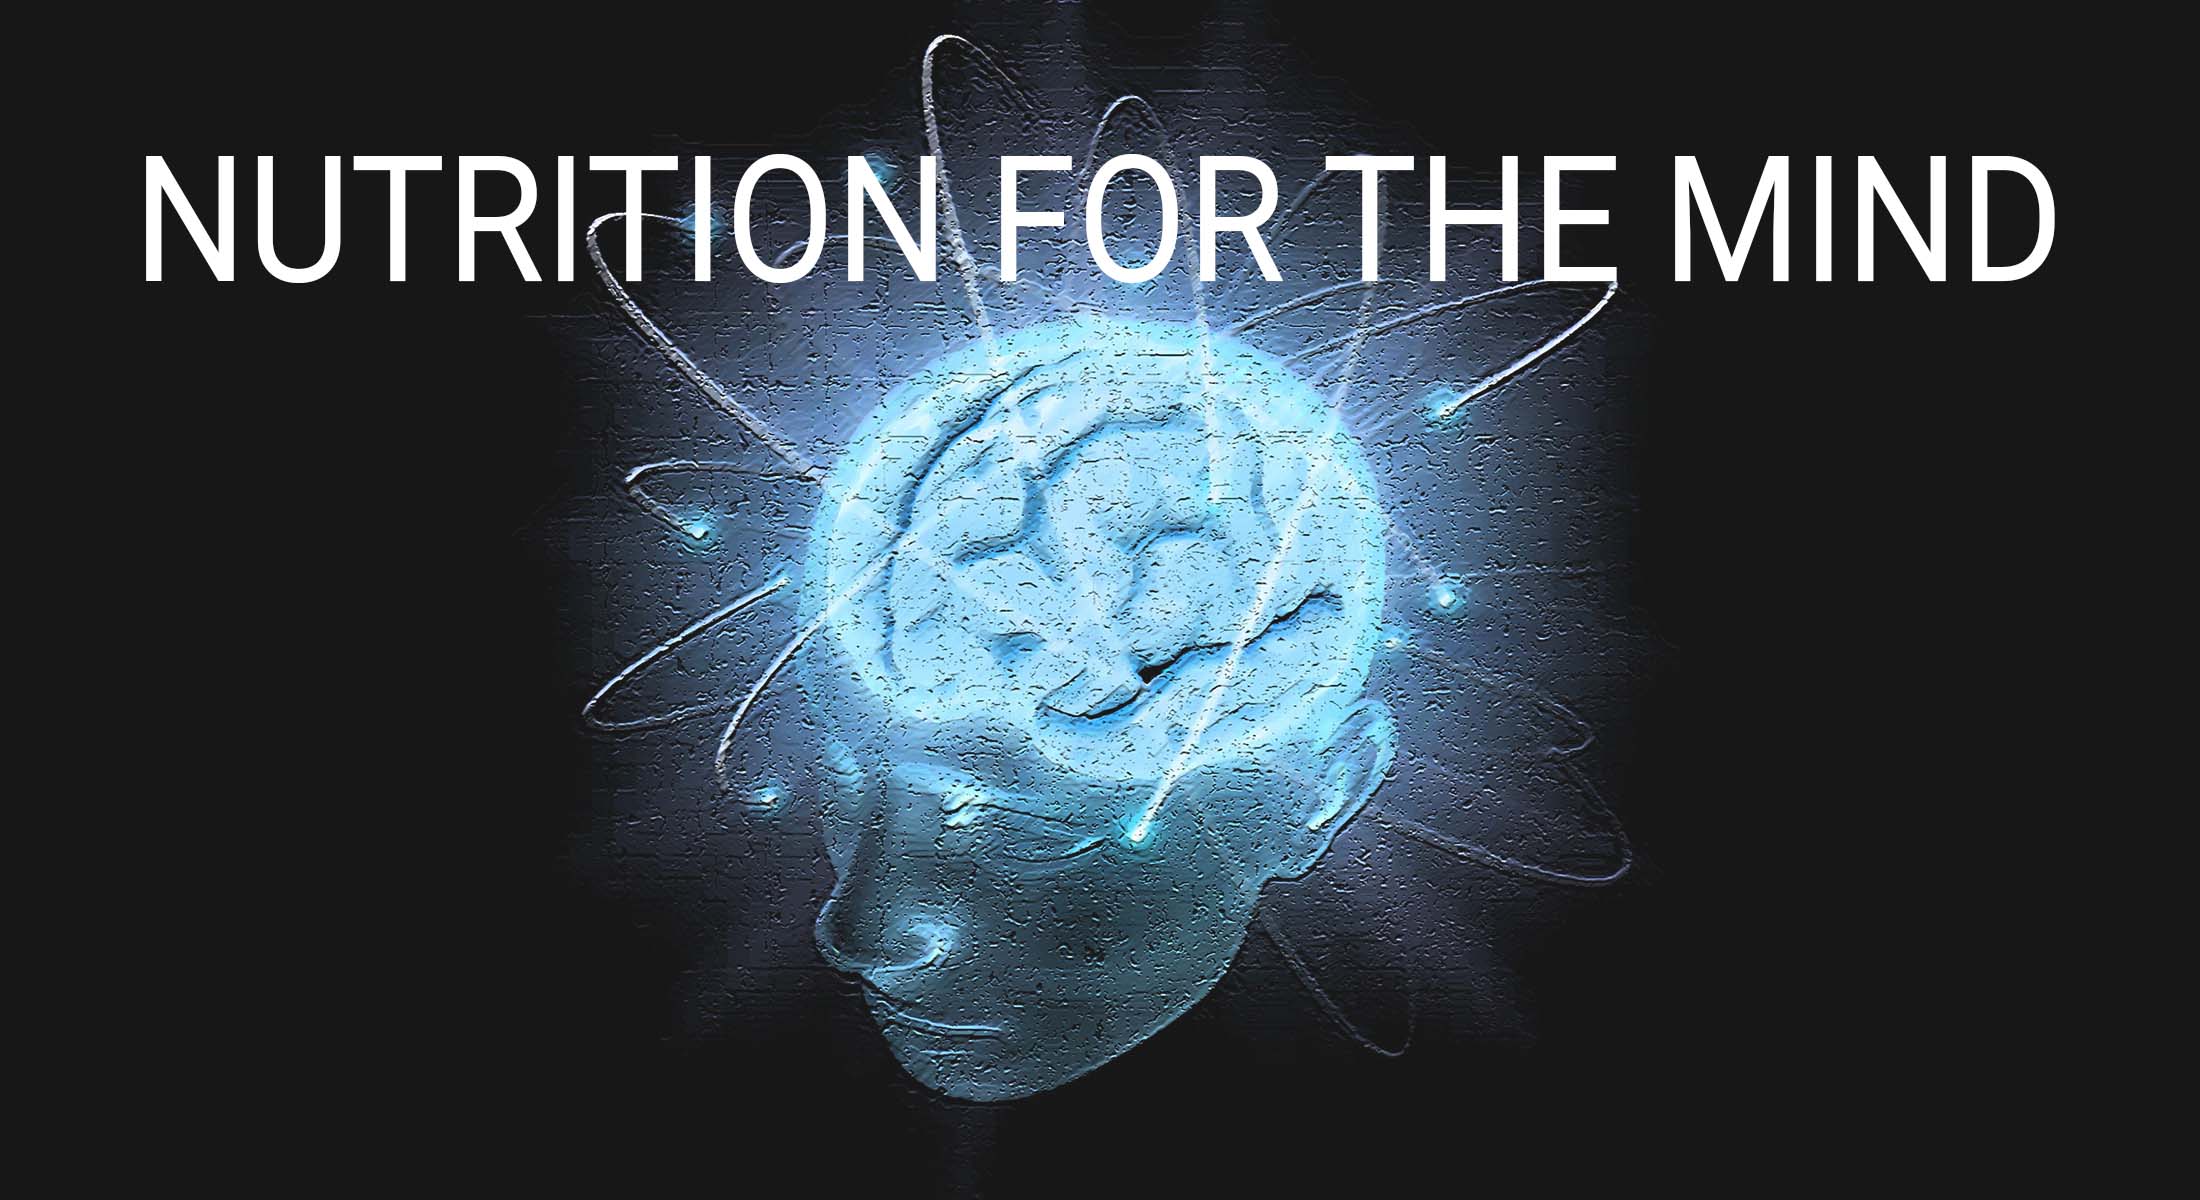 Nutrition for the Mind, Hypnotherapy for a healthier life-style. MVB-Health.